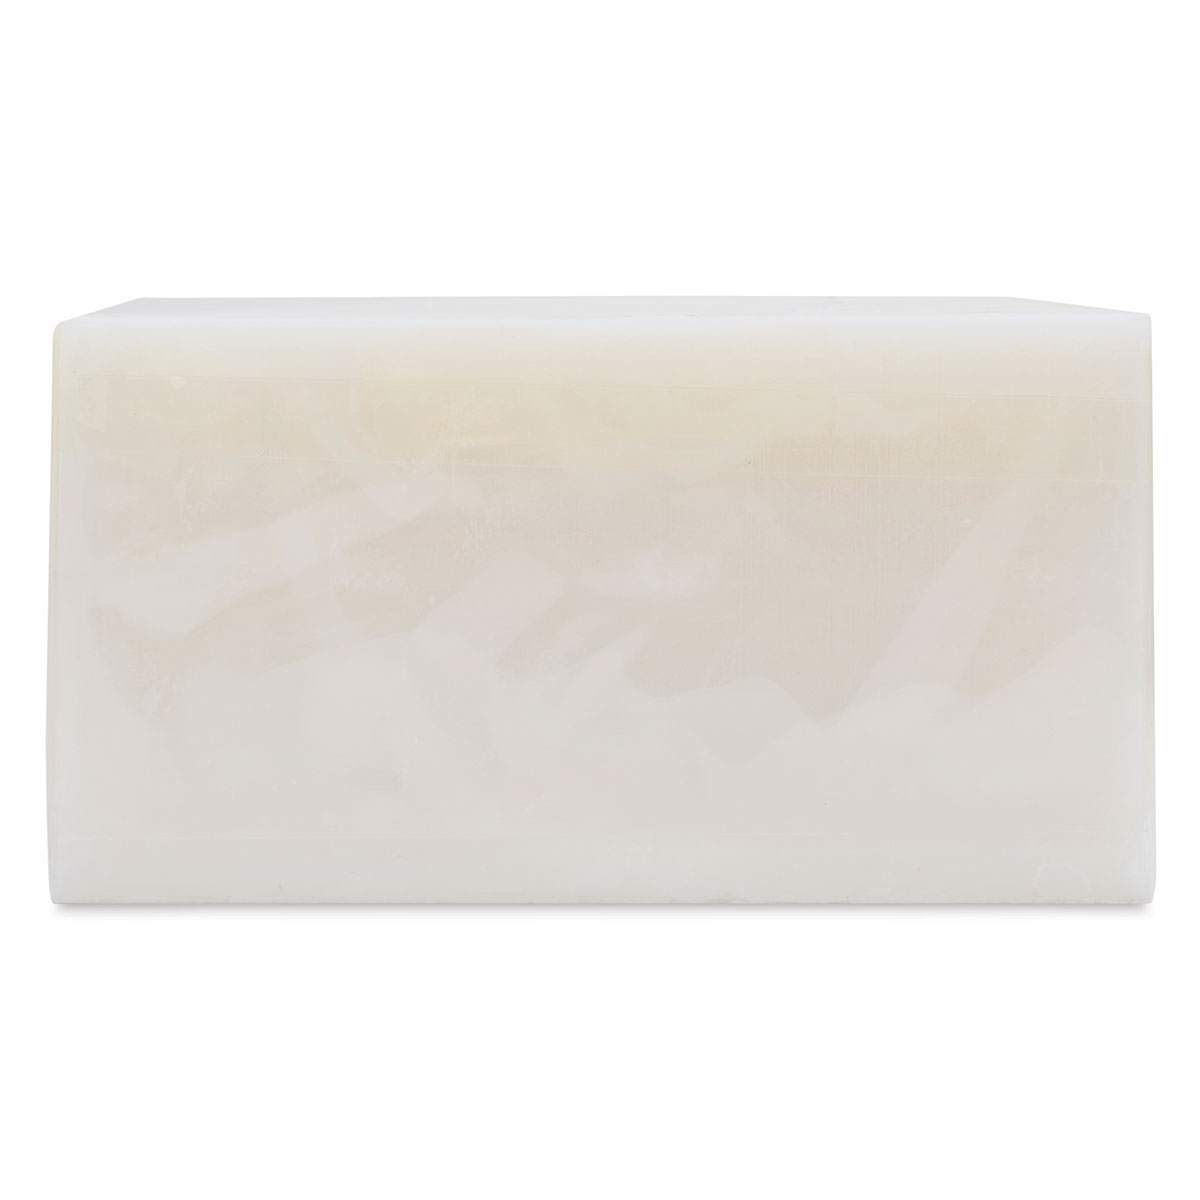 Olive Oil Clear Soap Base - SUDS Soap Maker - We R Memory Keepers